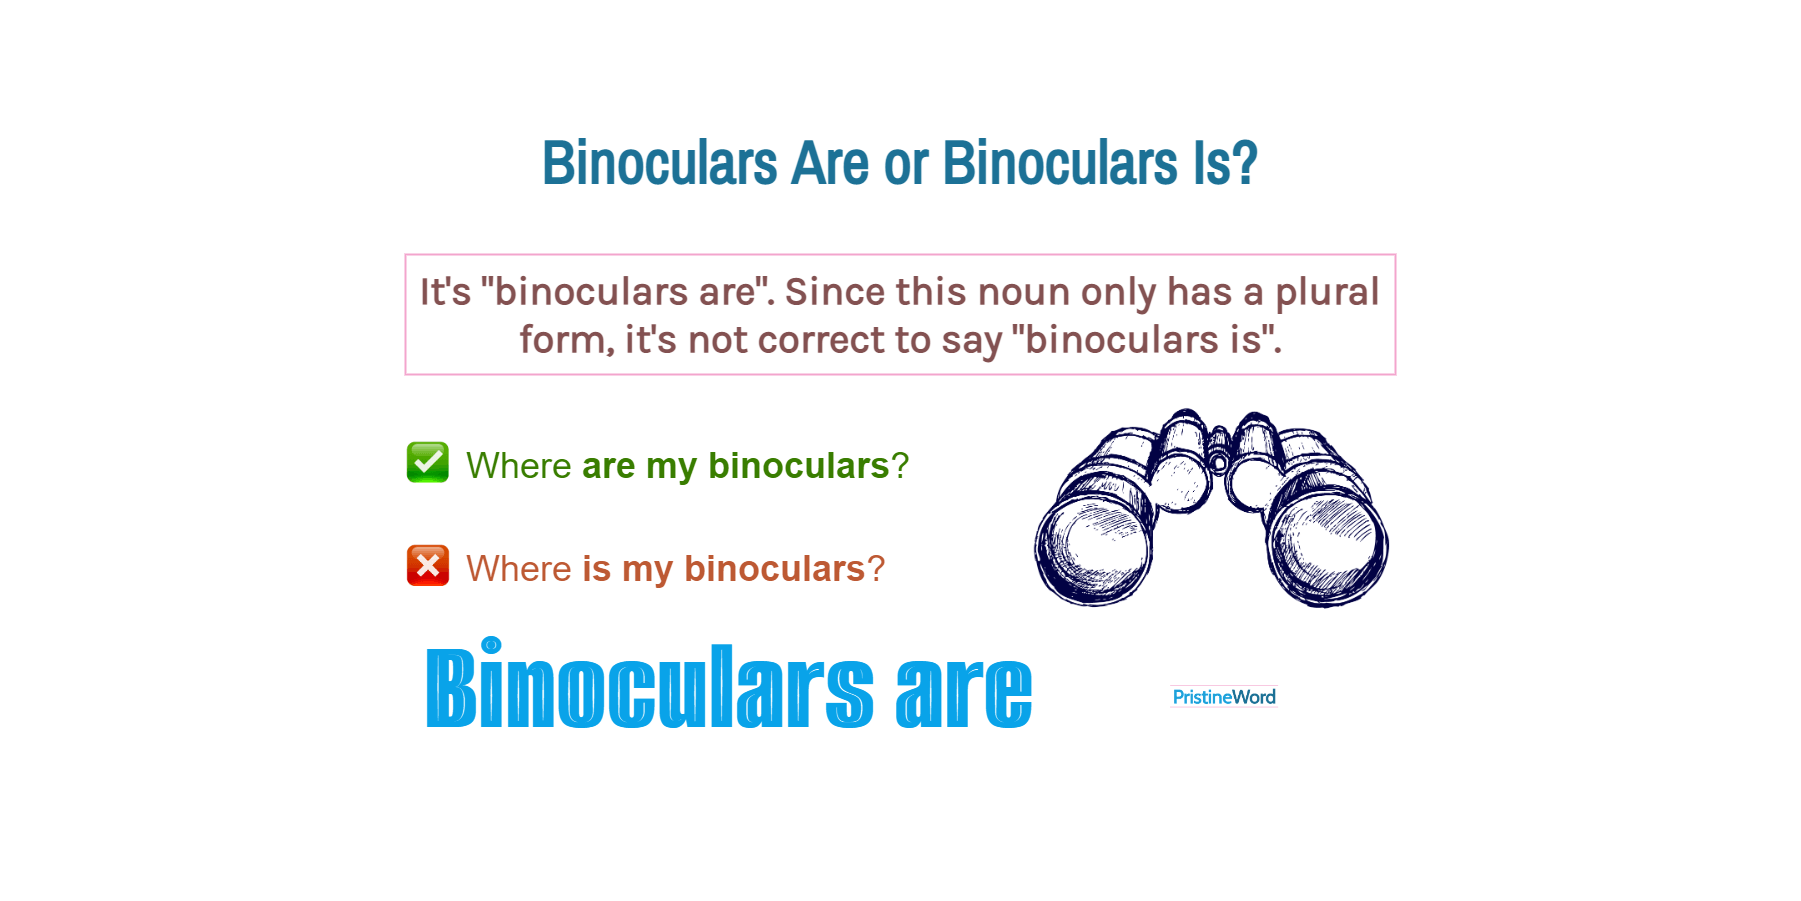 Binoculars Are Or Binoculars Is. Which Is Correct?